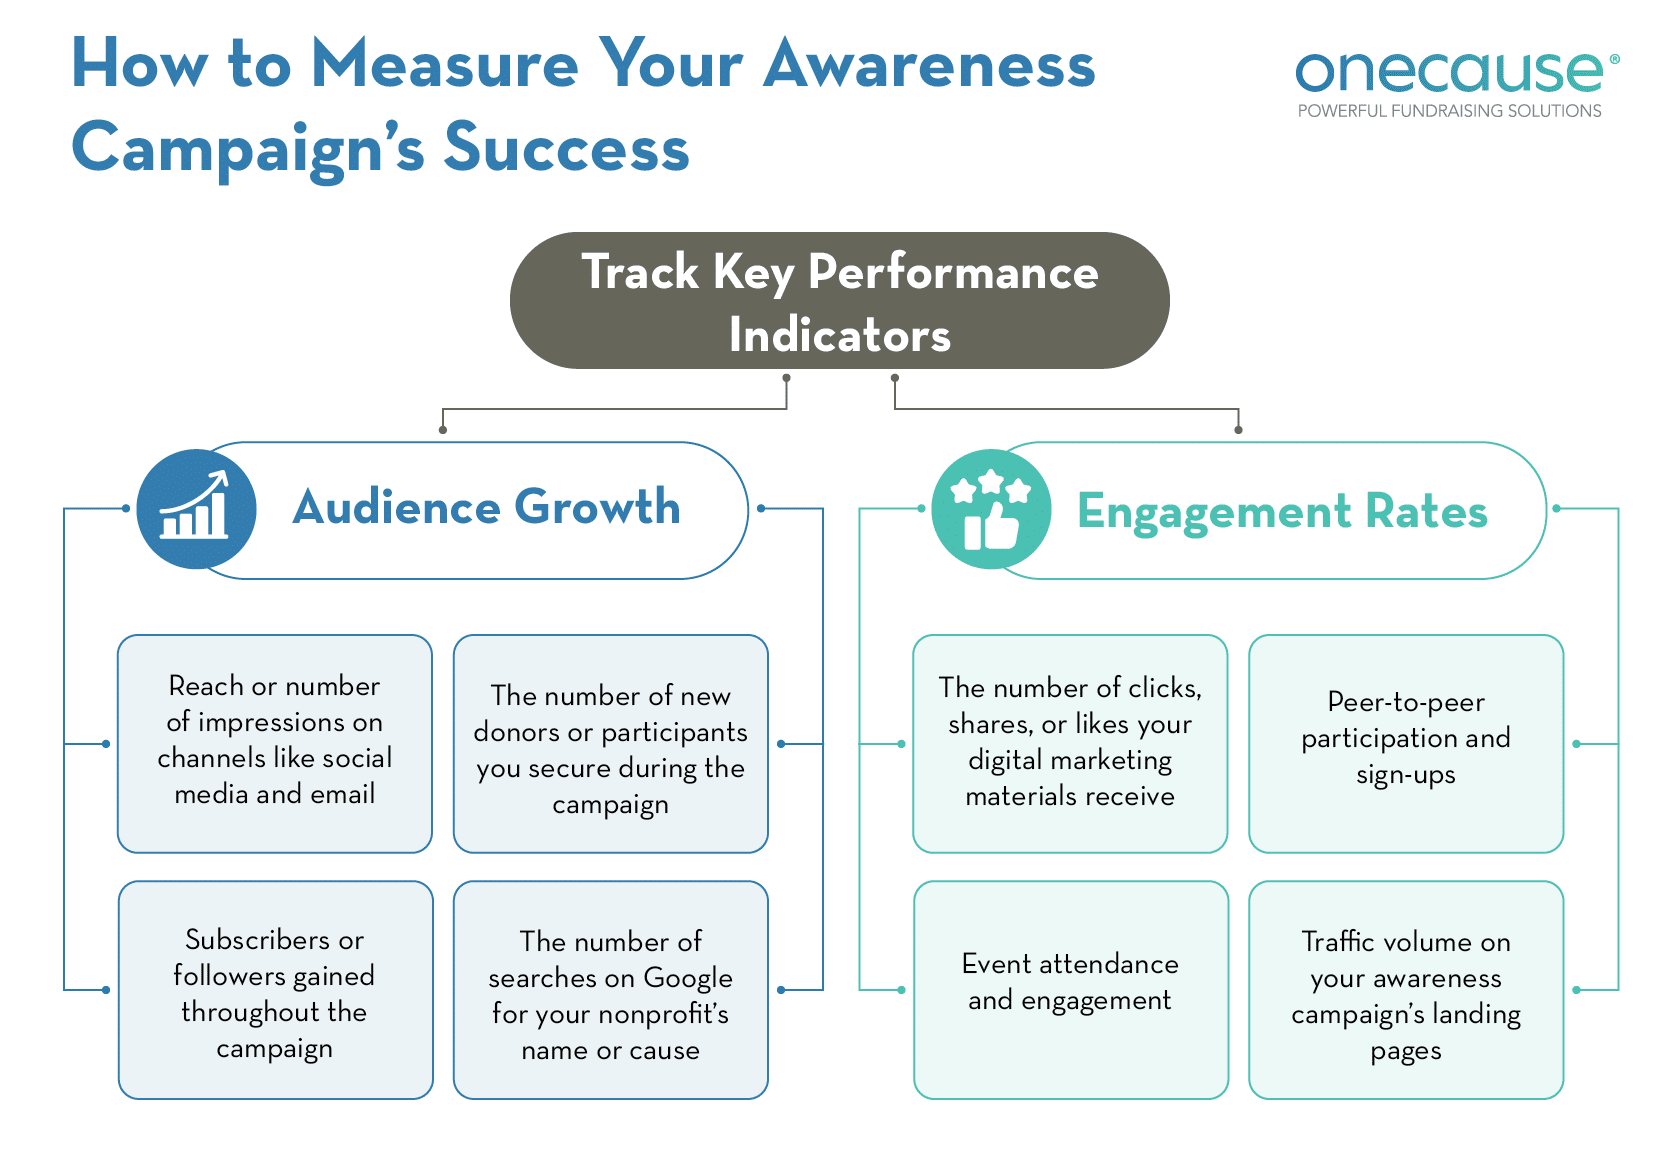 Tracking audience growth and engagement rates can help your organization assess the performance of your awareness campaign. 